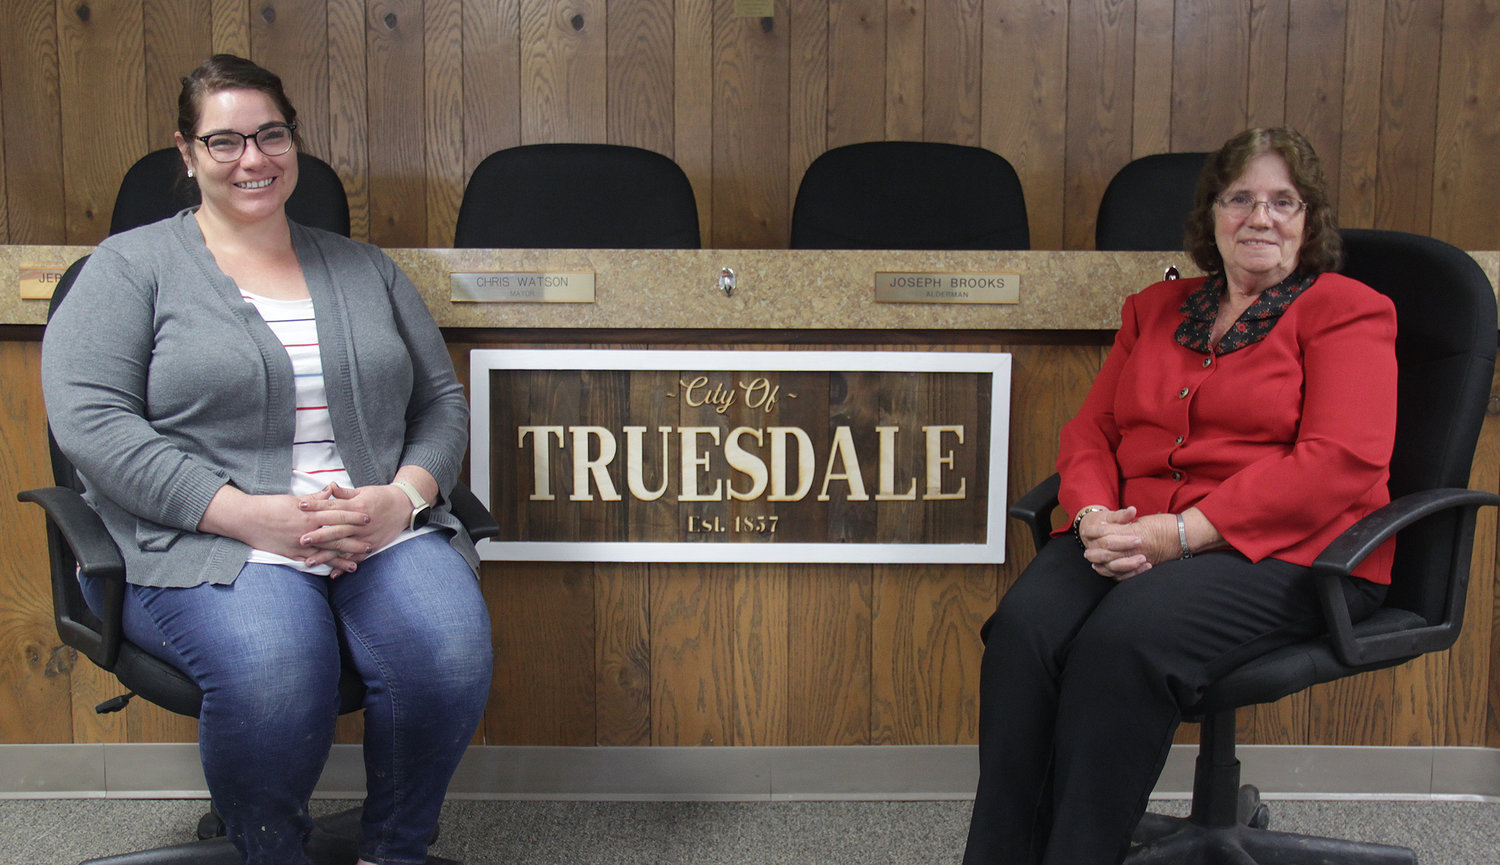 PASSING THE BATON — MaryLou Rainwater, right, has retired as Truesdale’s city clerk and administrator after 39 years in office. Elsa Smith-Fernandez, left, a 10-year employee, has been appointed as the new city clerk.